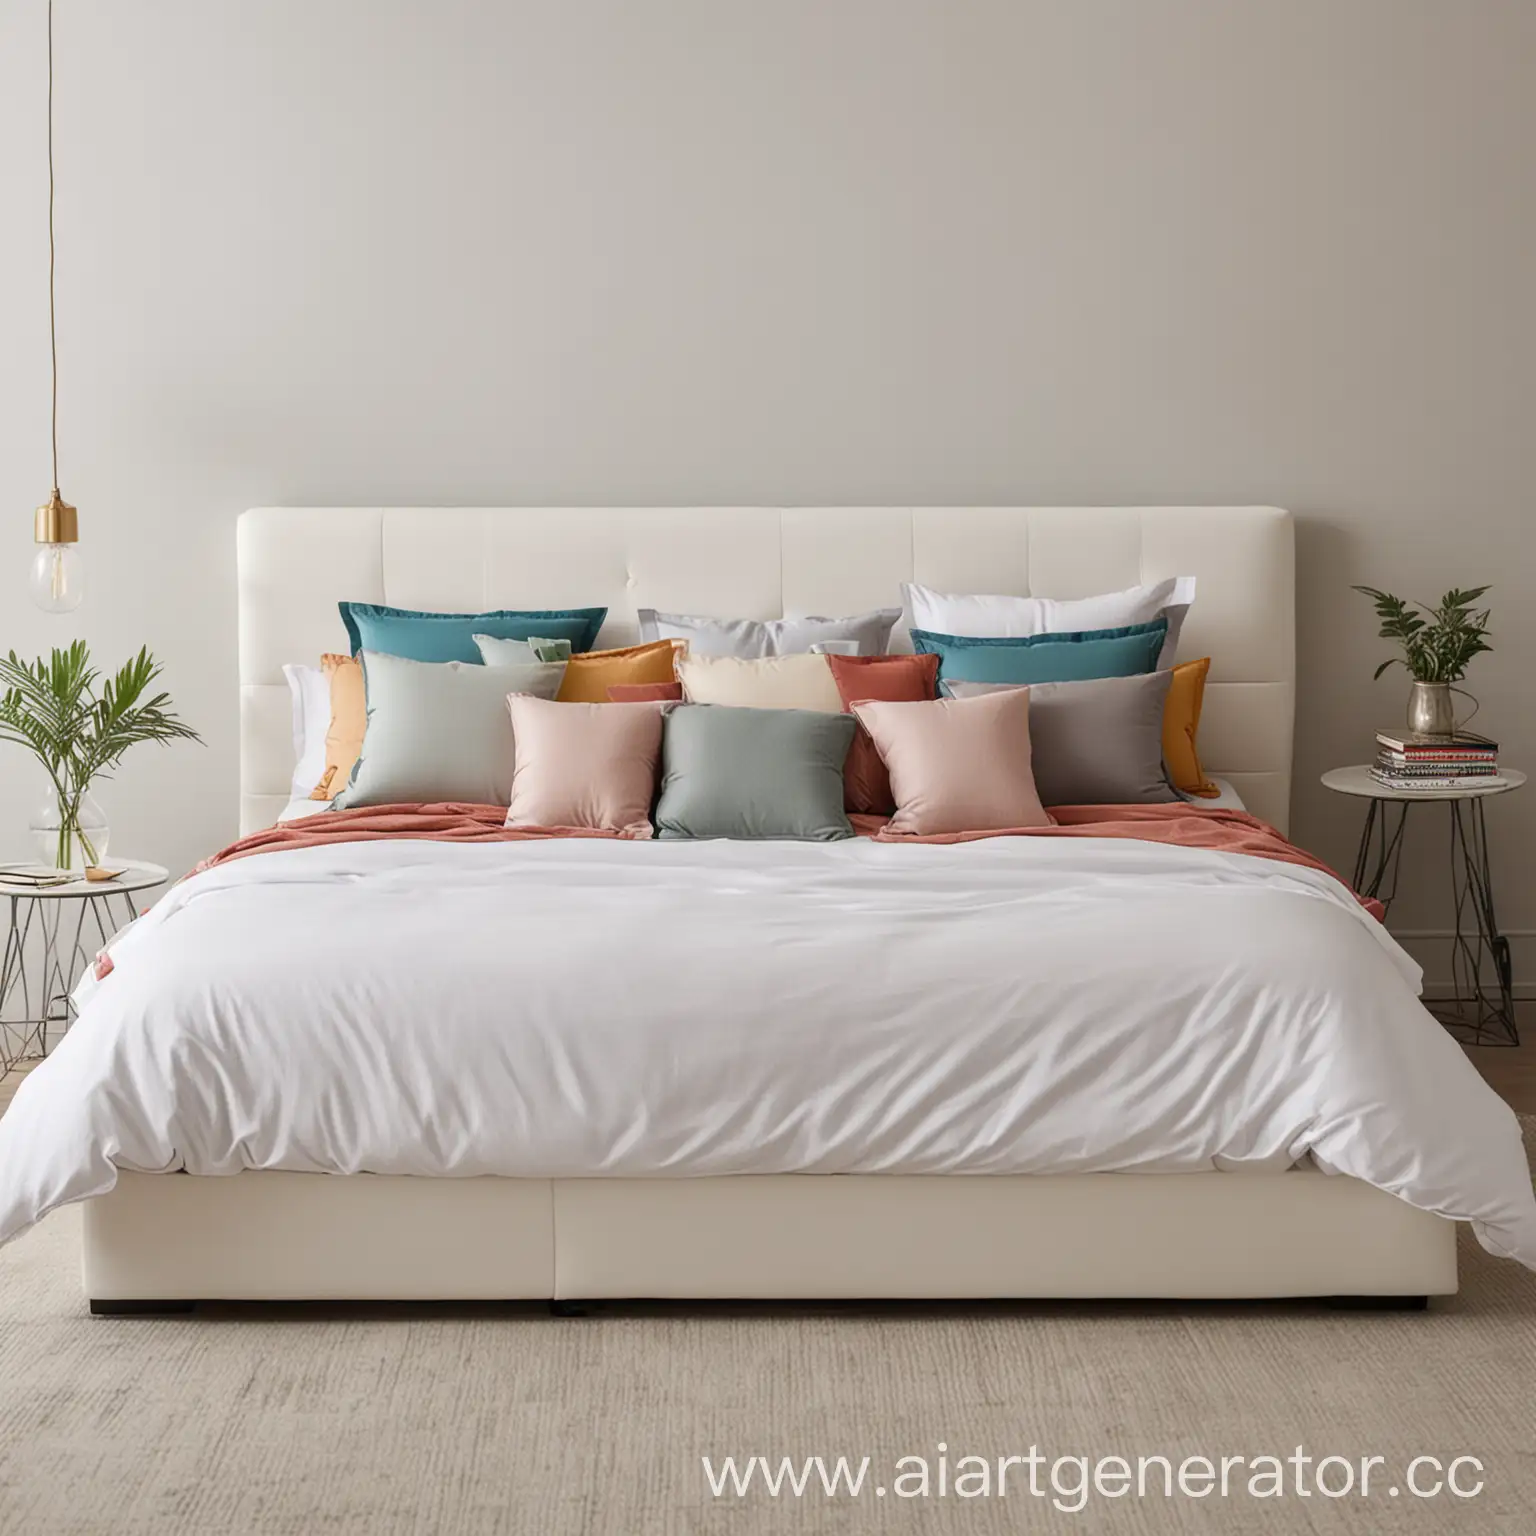 Modern-White-Bed-with-Colorful-Pillows-in-a-Spacious-Room-with-Soft-Lighting